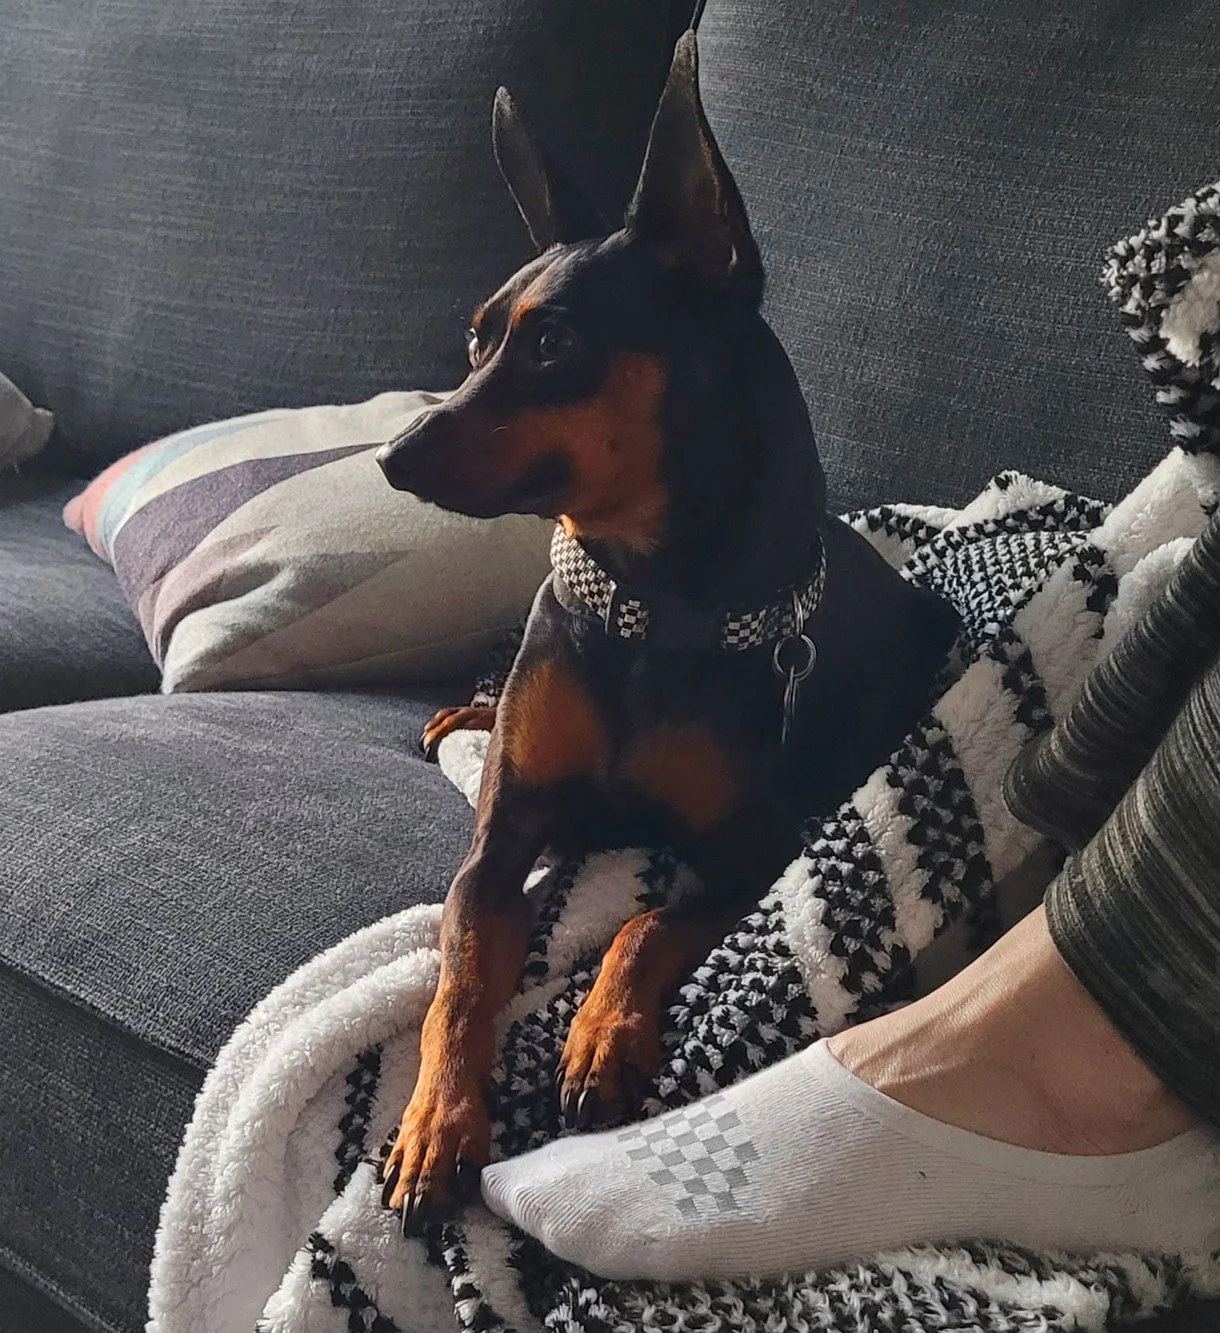 Black and brown doberman puppy with pointy ears sitting on gray couch next to cropped view of human foot